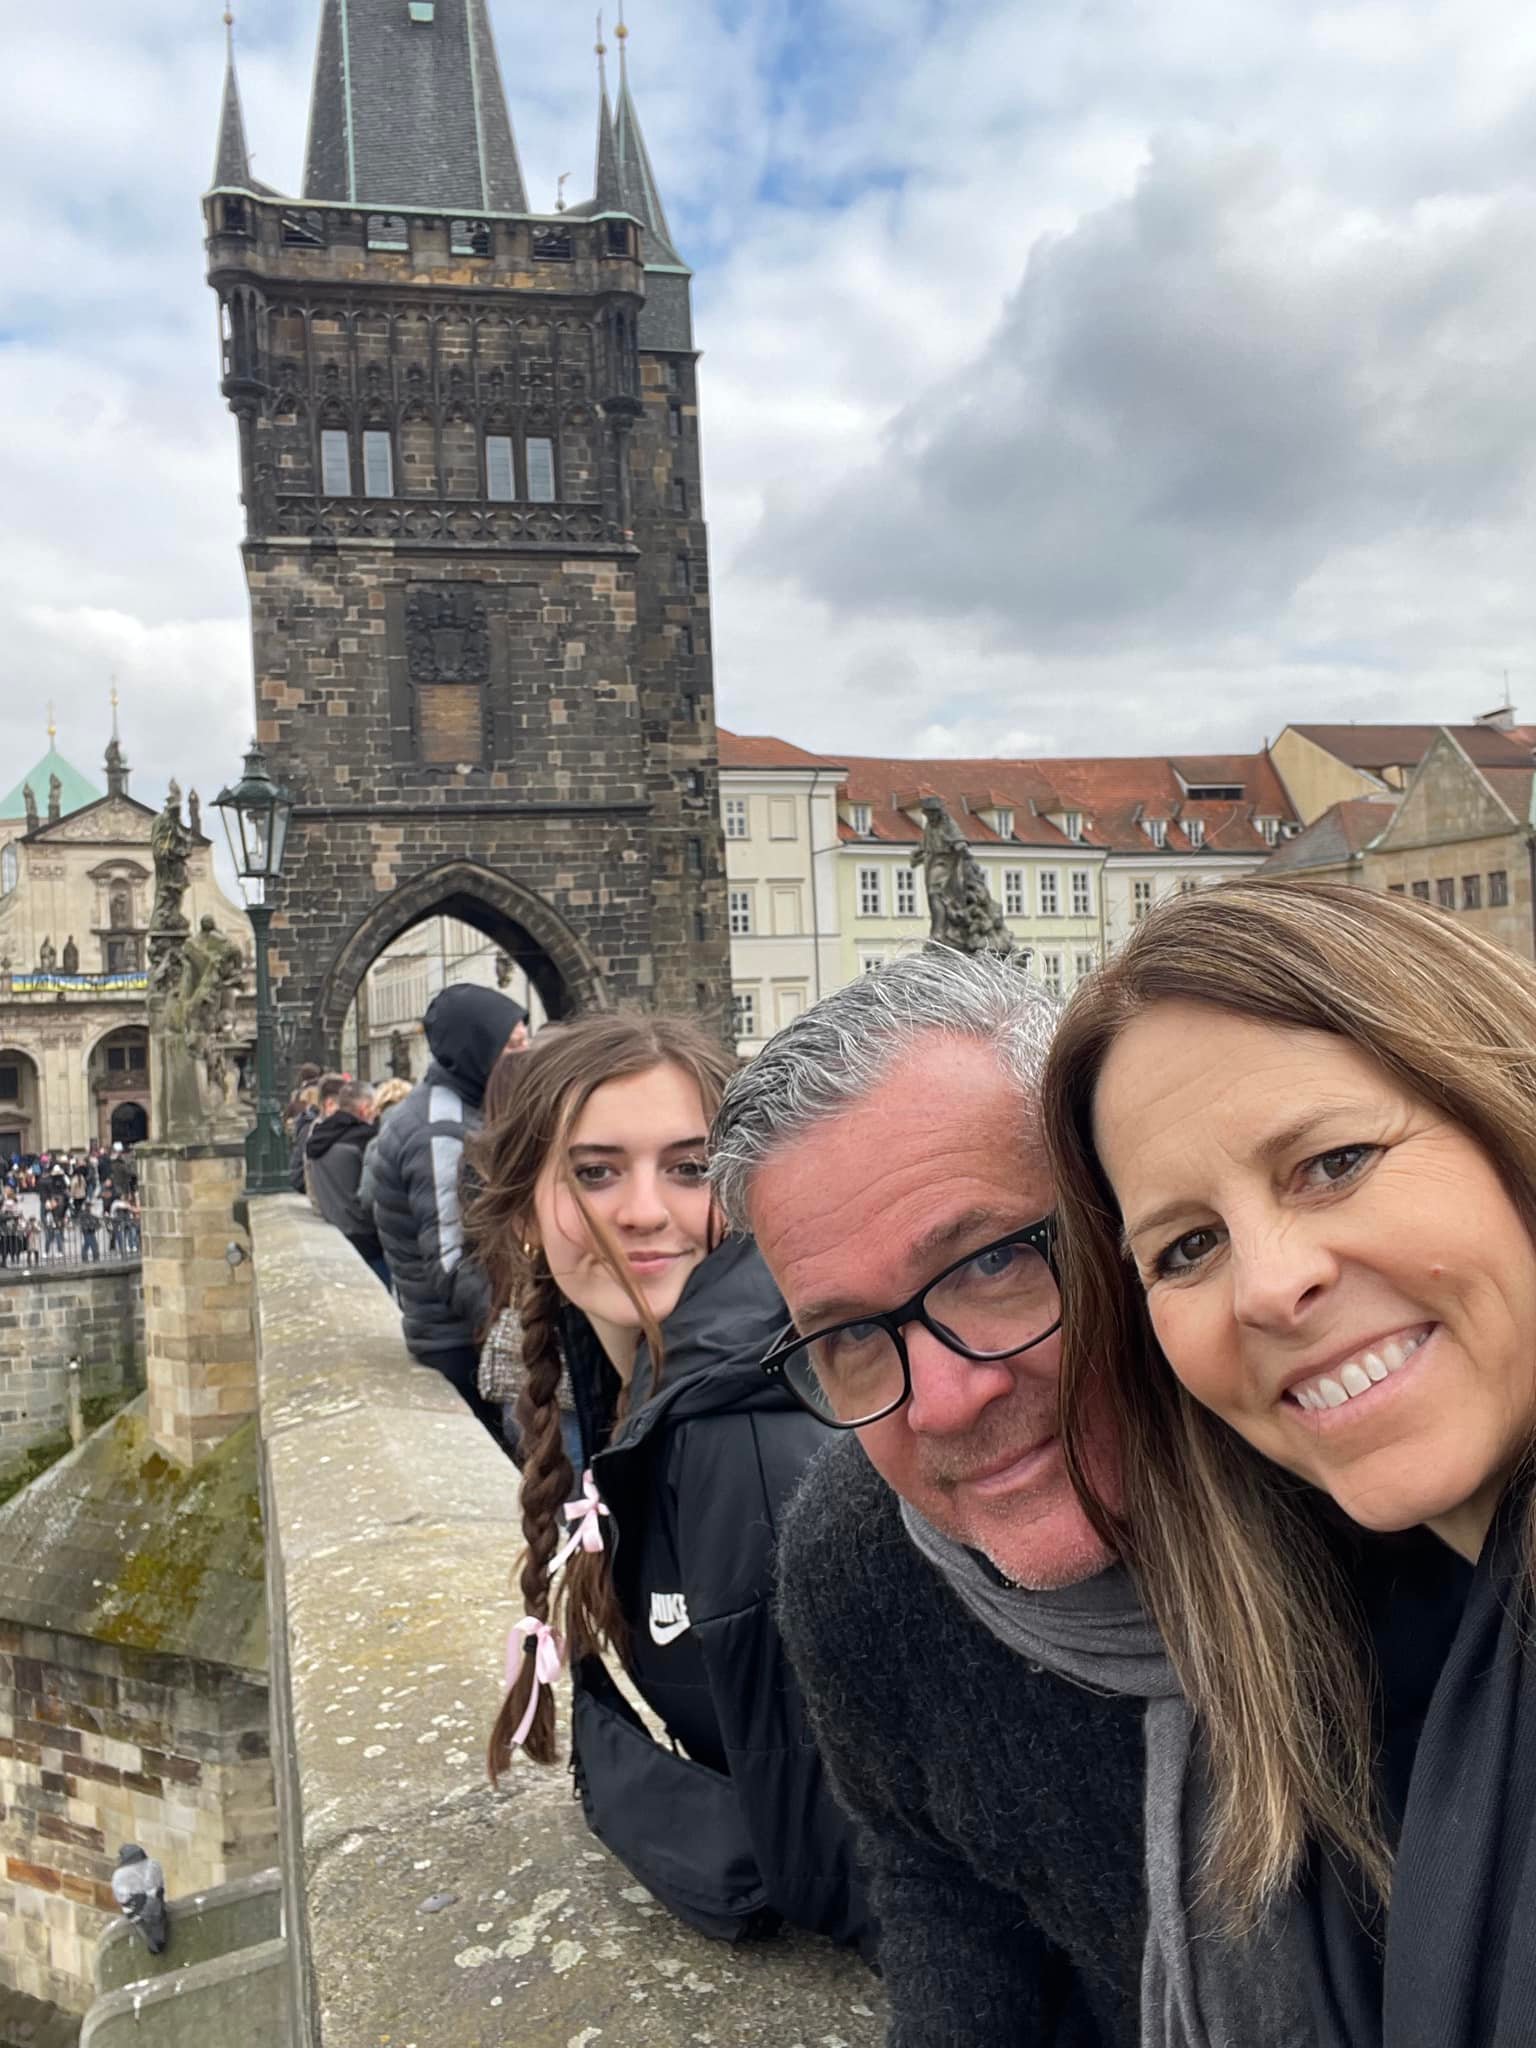 Having an amazing time visiting Prague with Hollie Packman and my 18 user old daughter Maxine.